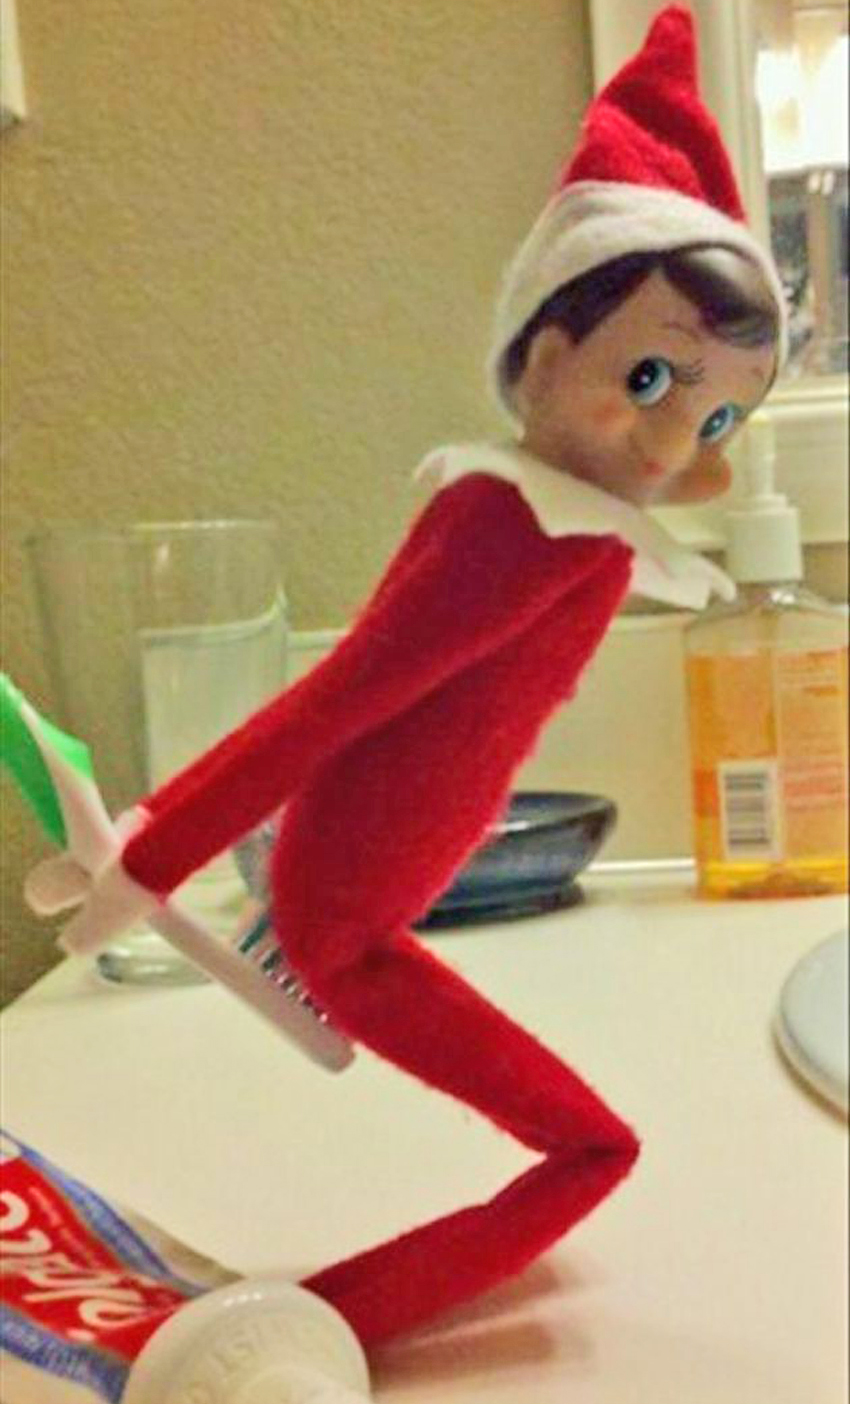 75 OF THE BEST FUNNIEST ELF OF THE SHELF IDEAS EVER! The Howler Monkey